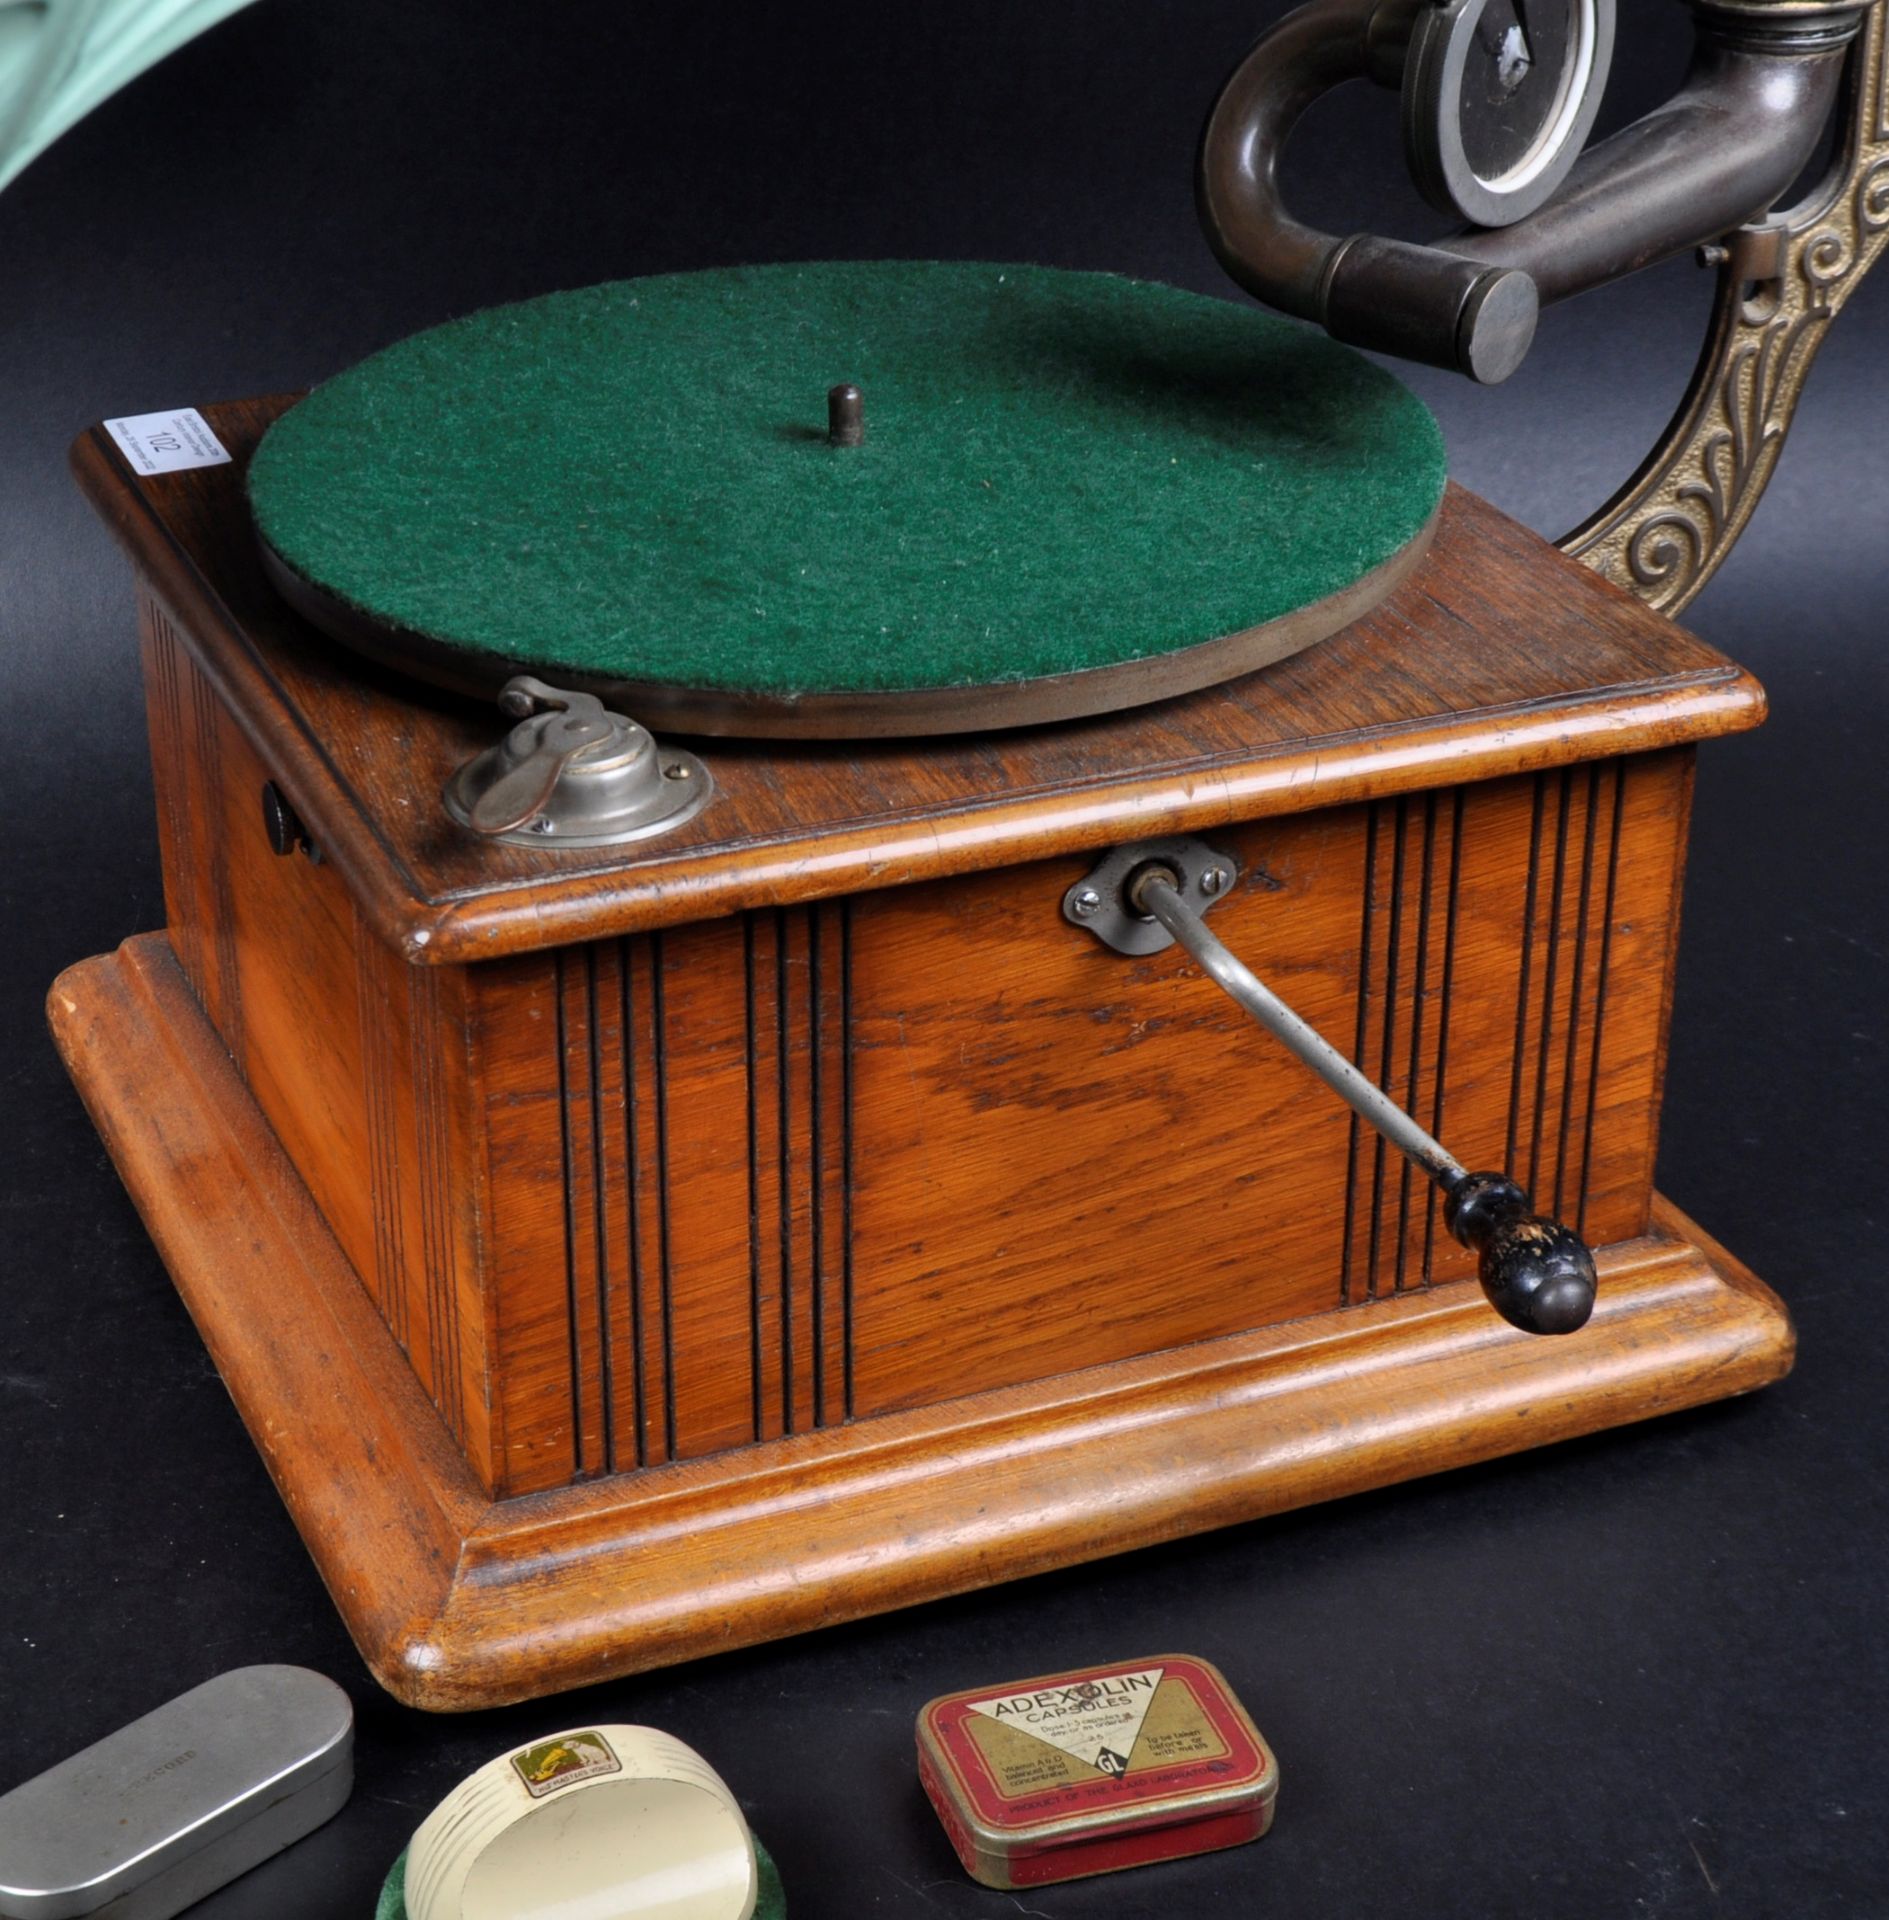 VINTAGE EARLY 20TH CENTURY GRAMOPHONE RECORD PLAYER - Image 6 of 7